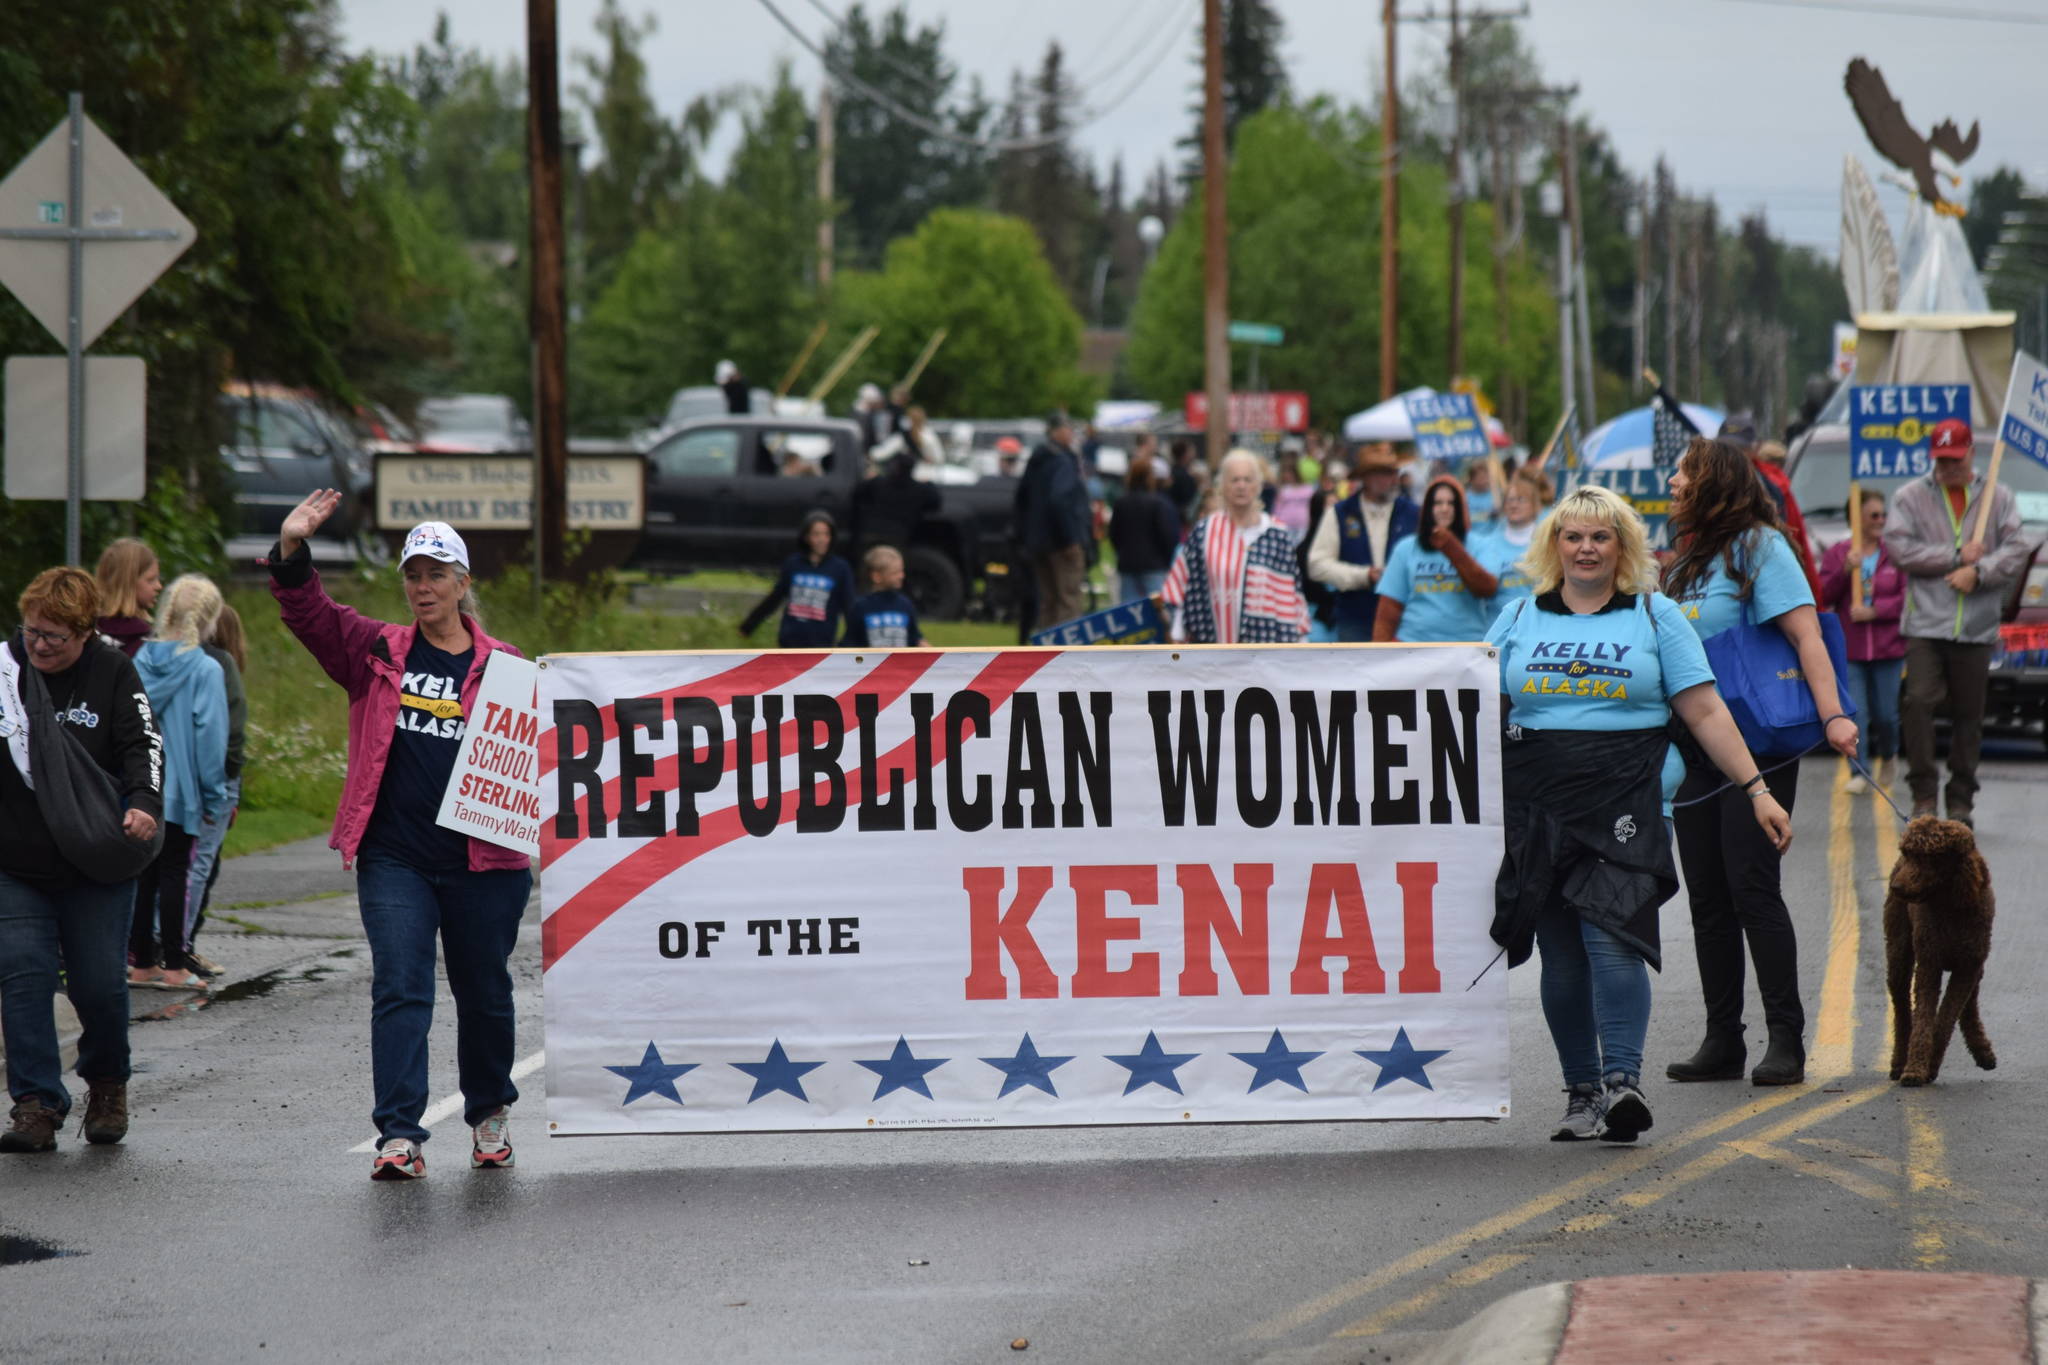 Members of the Republican Women of the Kenai wave to the crowd during the Soldotna Progress Days parade on Saturday, July 24, 2021. (Camille Botello / Peninsula Clarion)